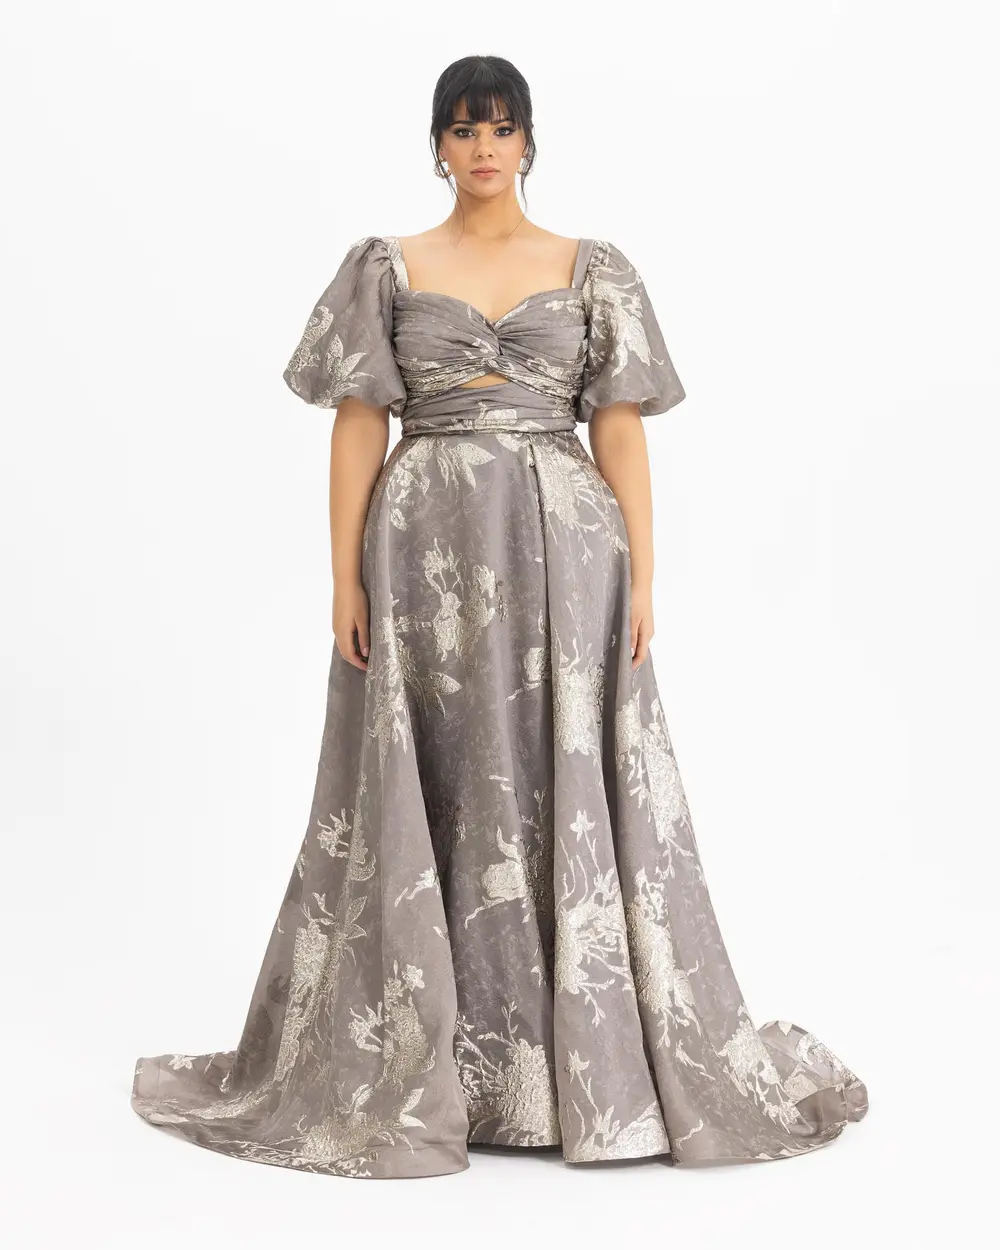  PLUS SIZE BALLOON SLEEVE PATTERNED EVENING DRESS